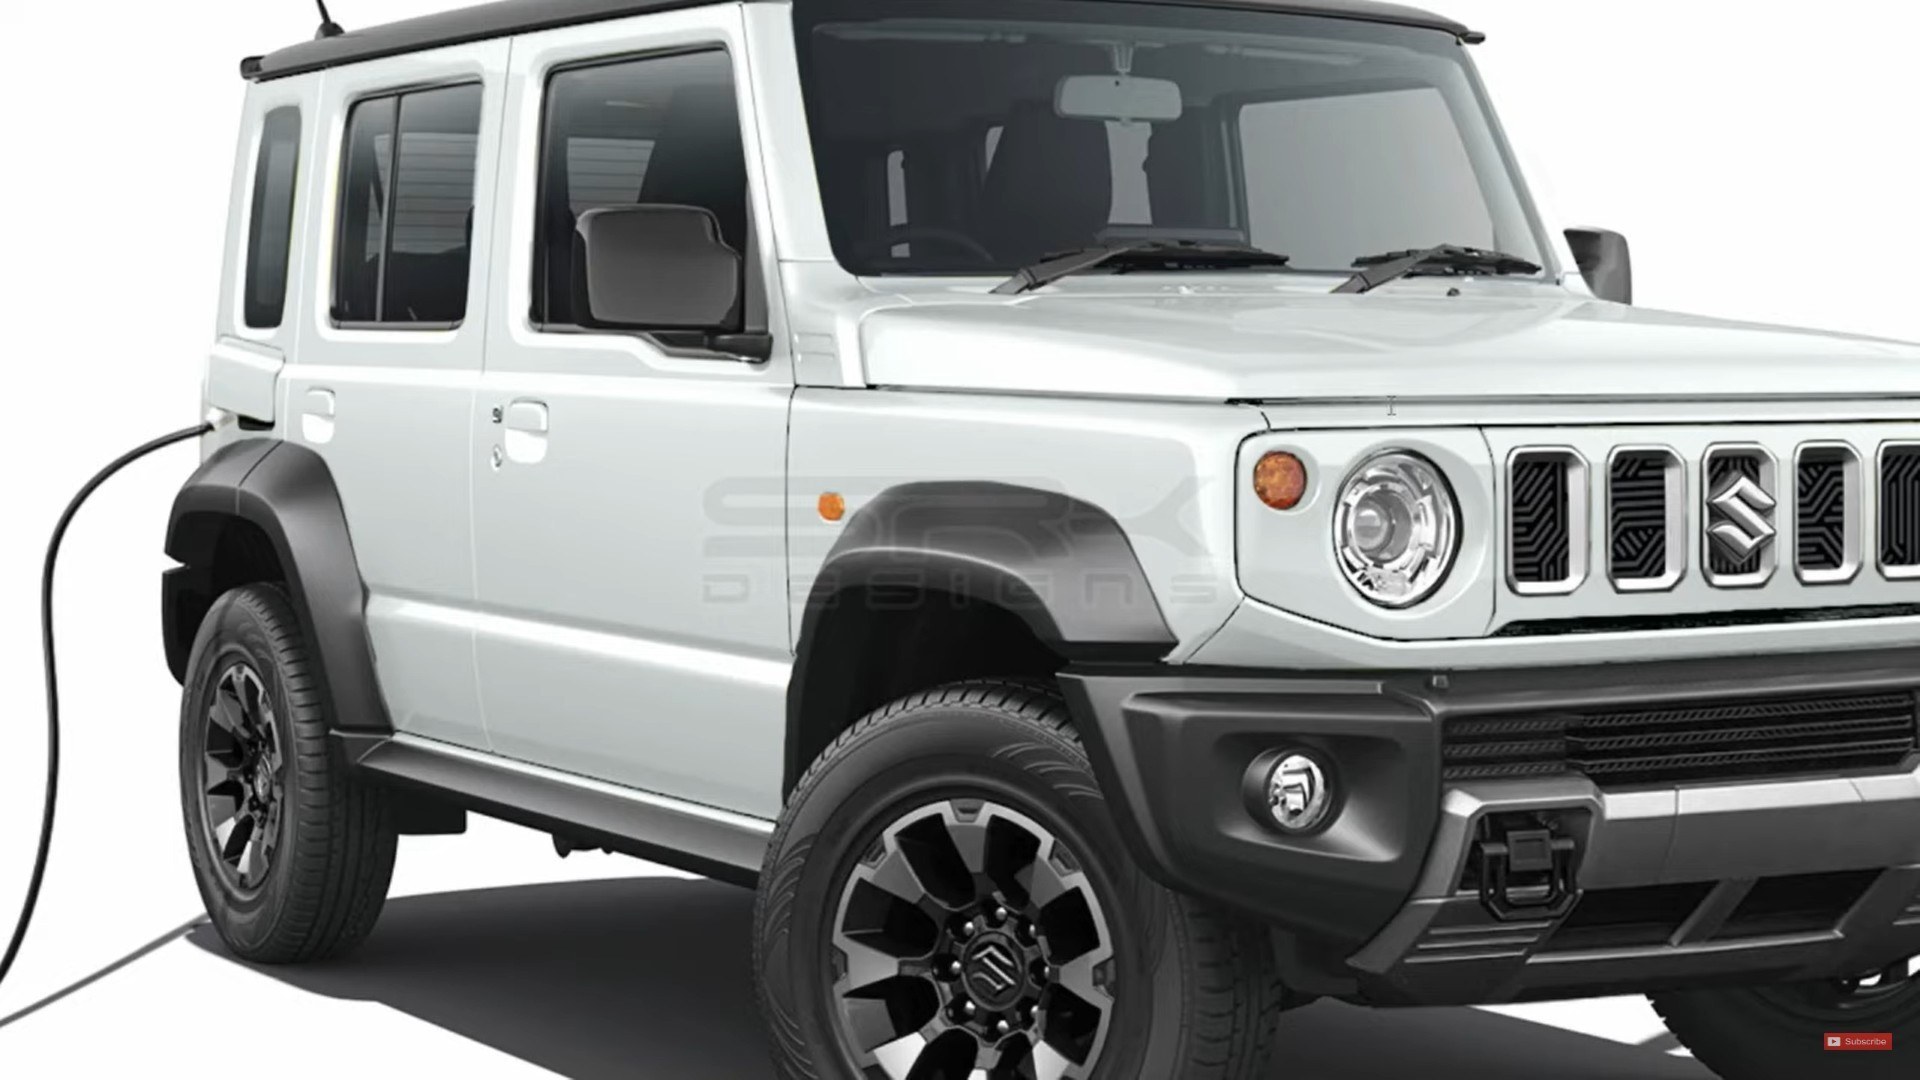 America Could Also Use The 2024 Suzuki Jimny Ev 5 Door Suv If It Looks Like This 8 